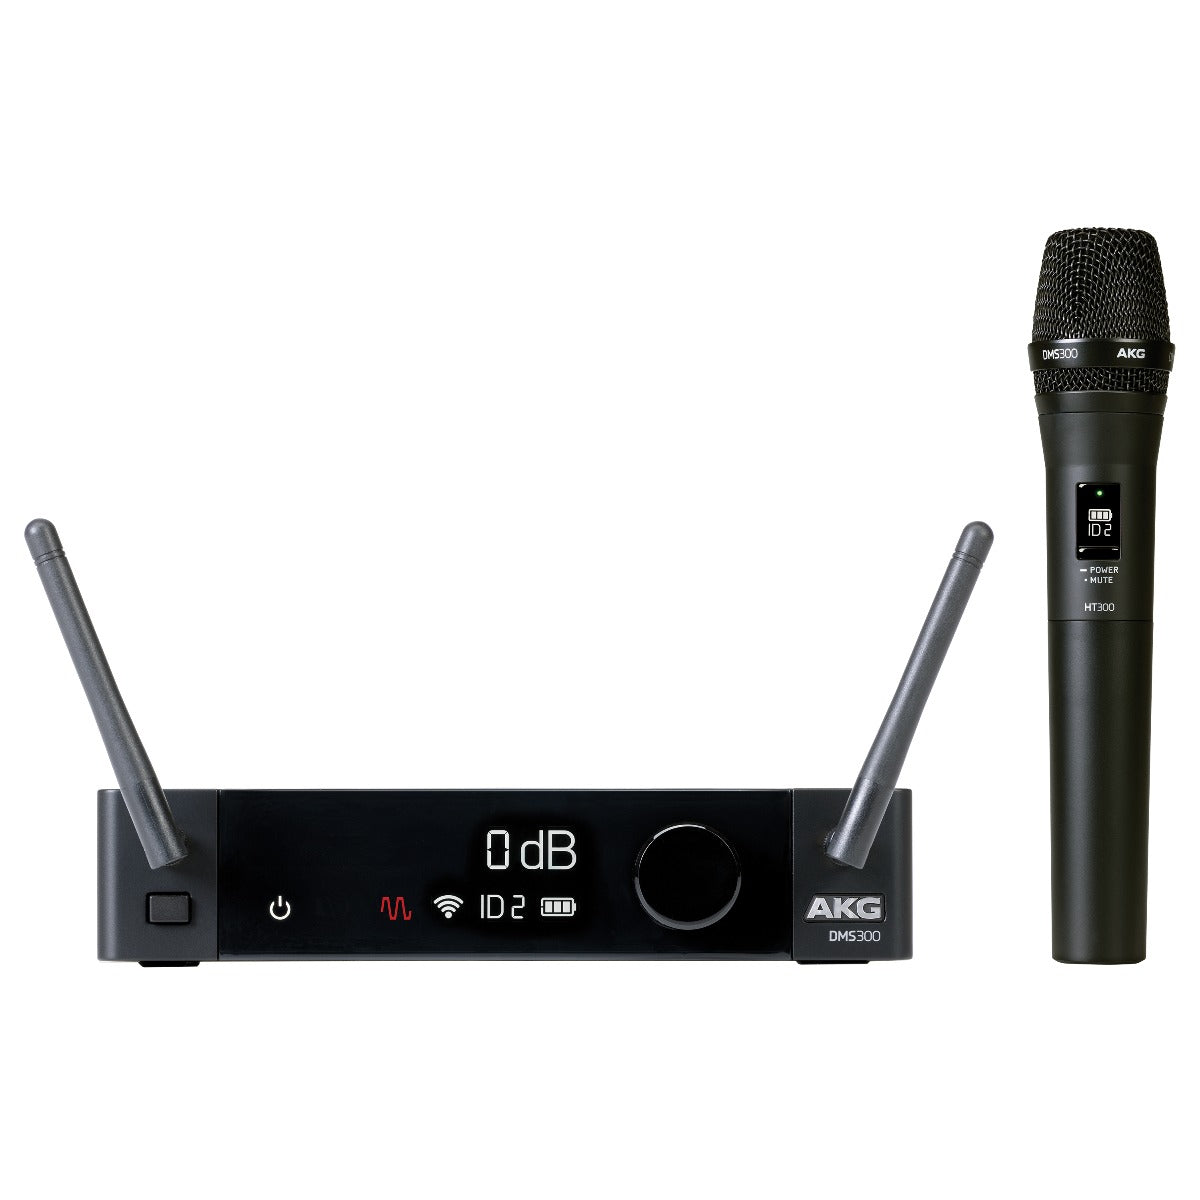 Image of the AKG DMS300 Handheld Microphone Wireless System